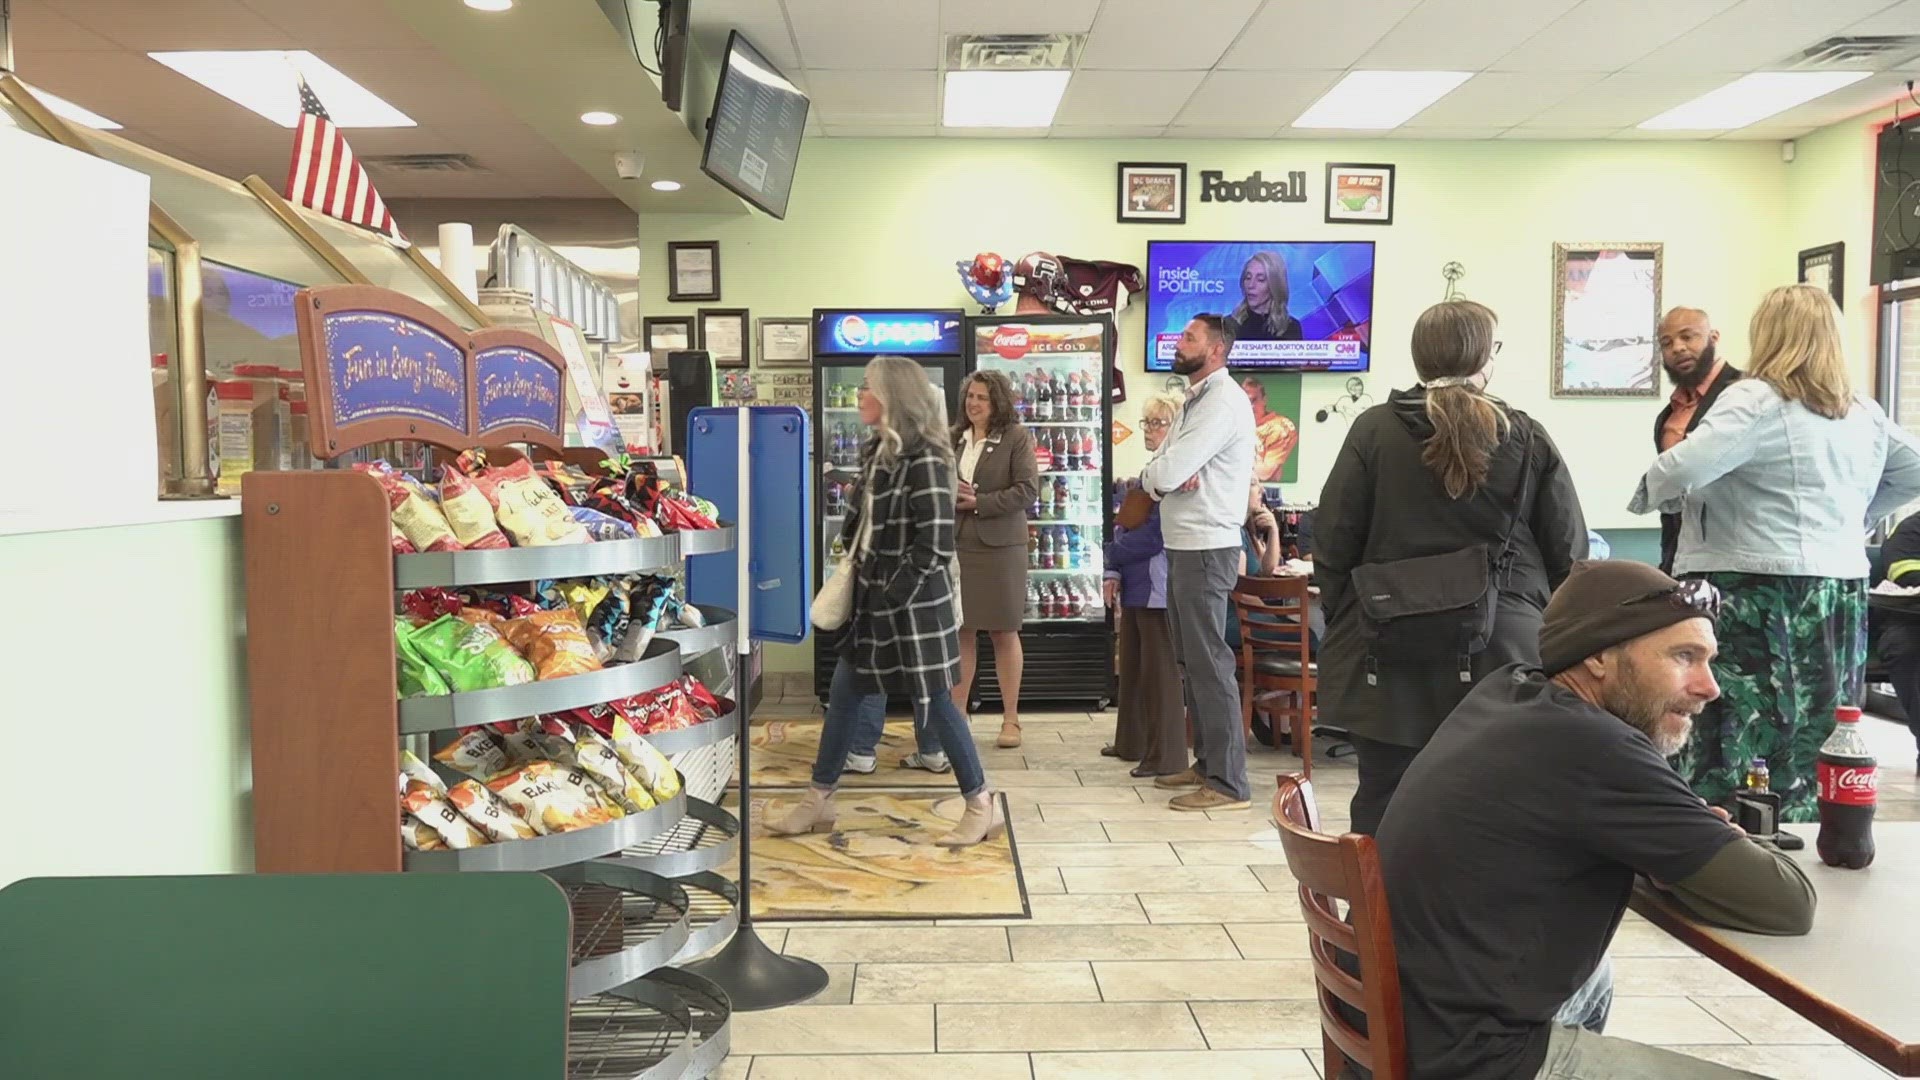 On Wednesday, a surge of new and long-time customers surprised the owners of "Time Out Deli."